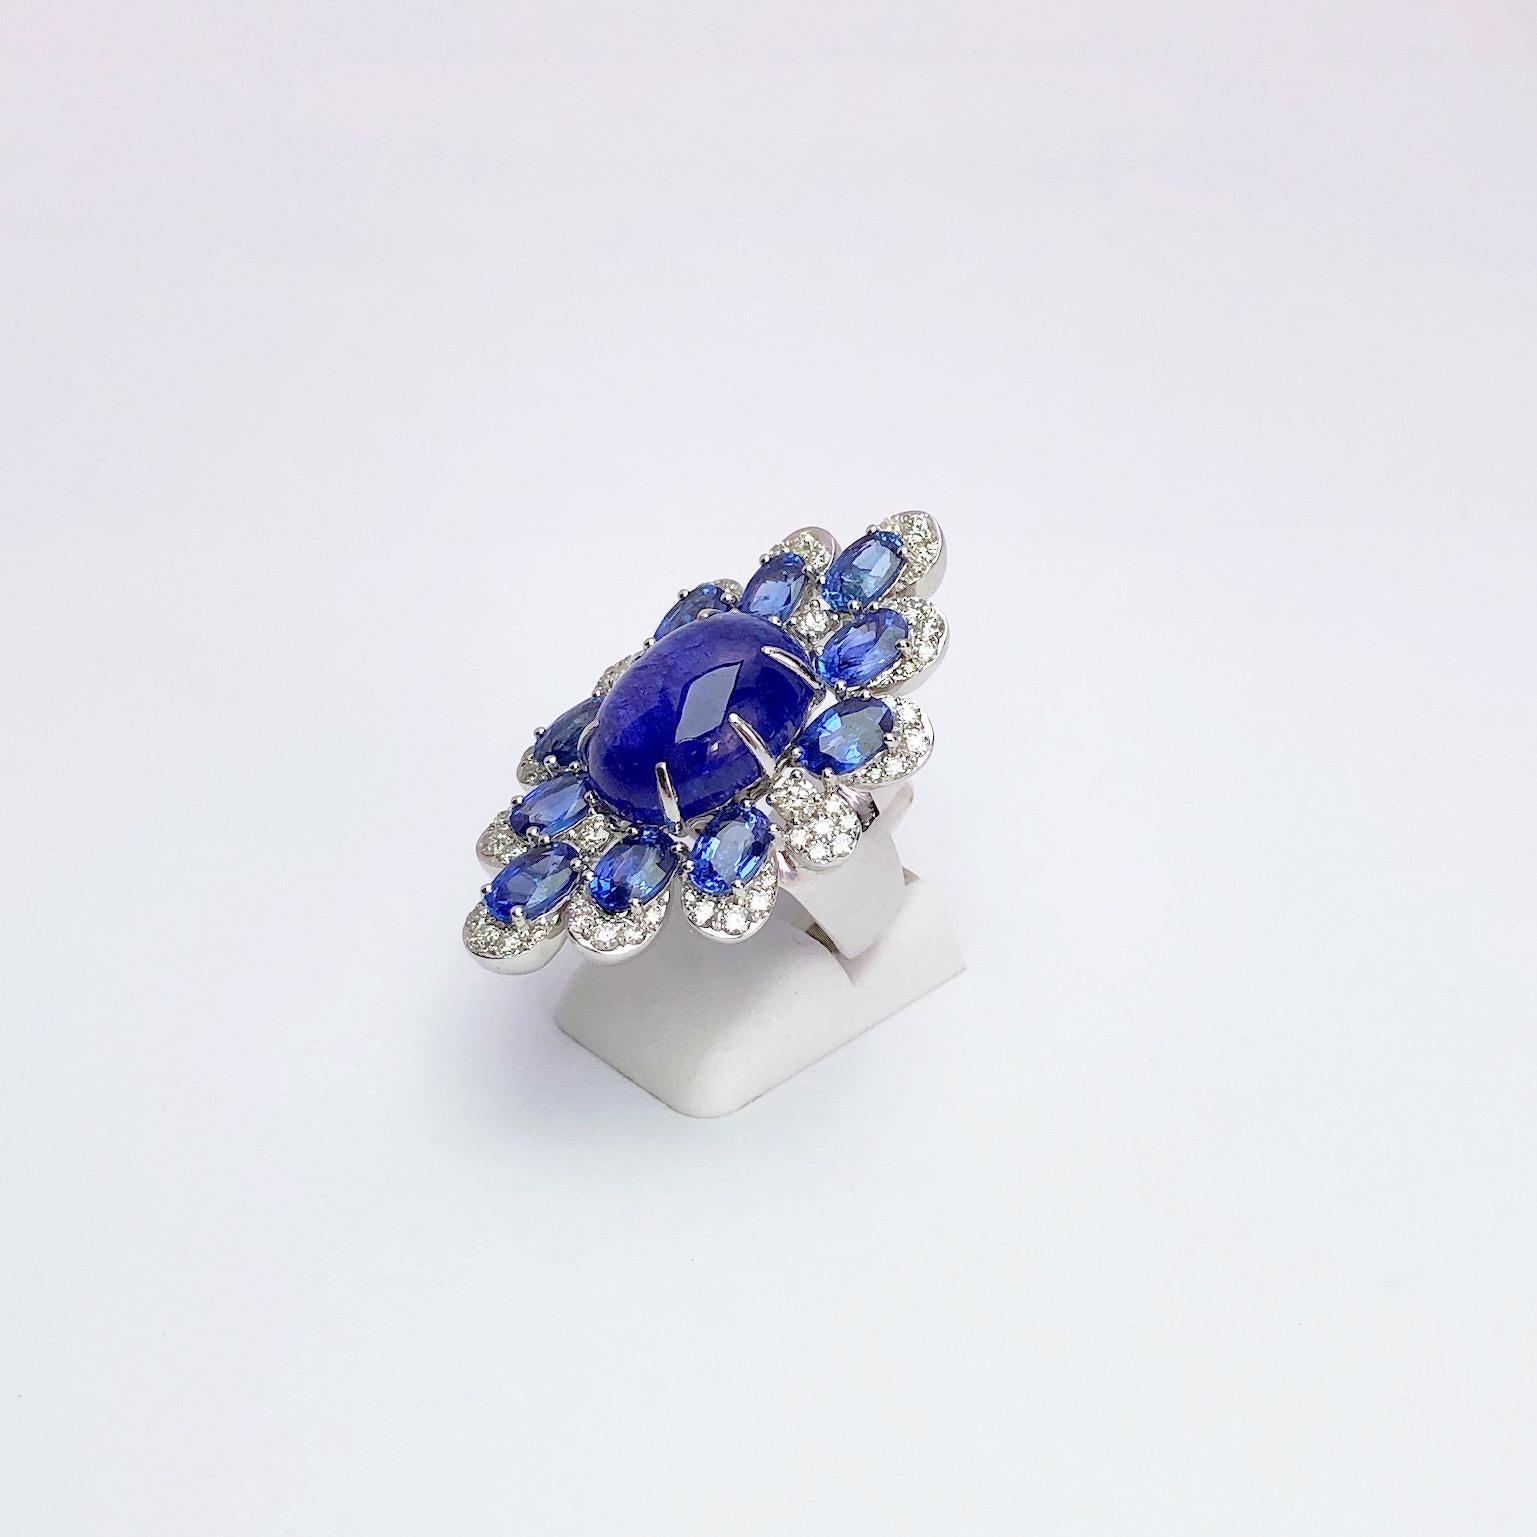 Modern Sutra 18 Karat Gold Ring with Cabochon Tanzanite, Blue Sapphires and Diamonds